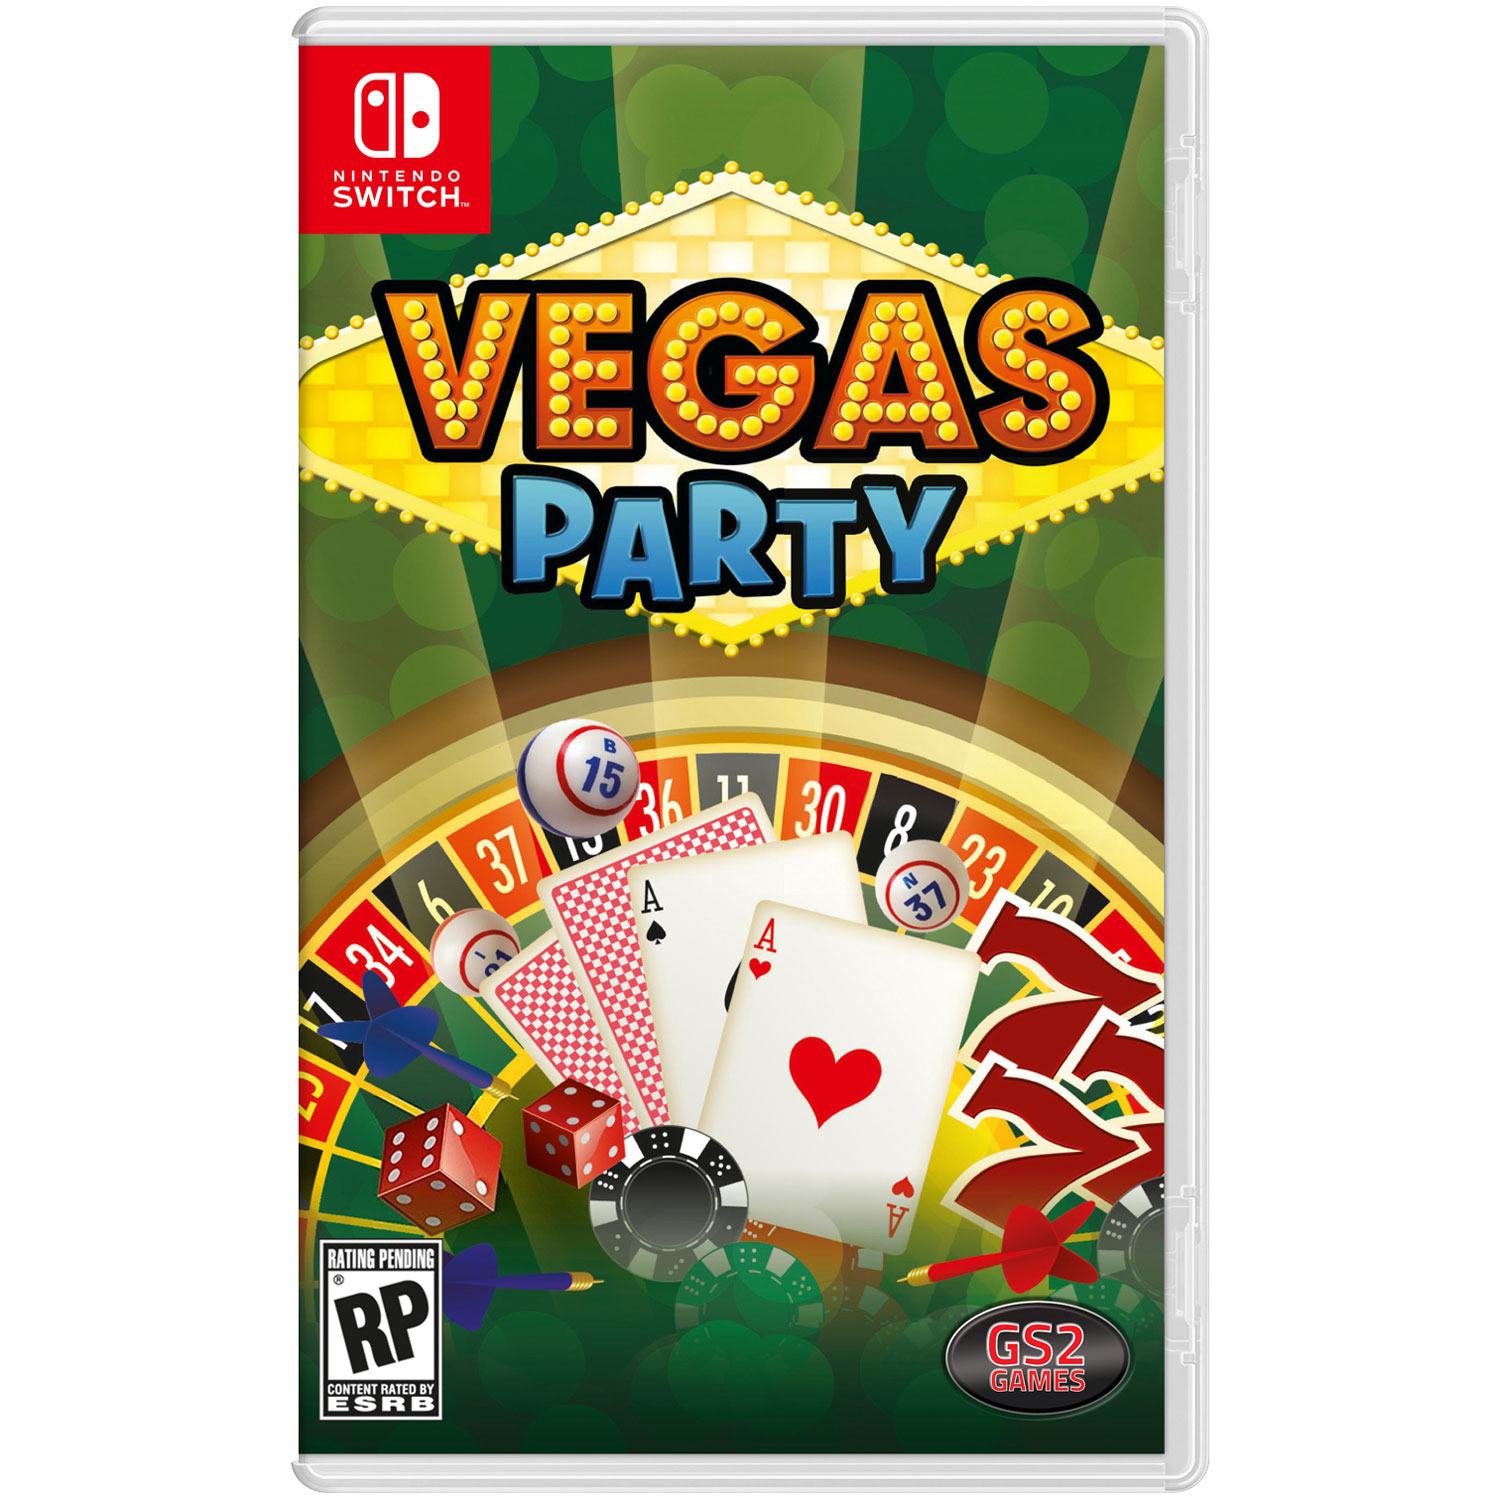 Vegas Party (Switch)